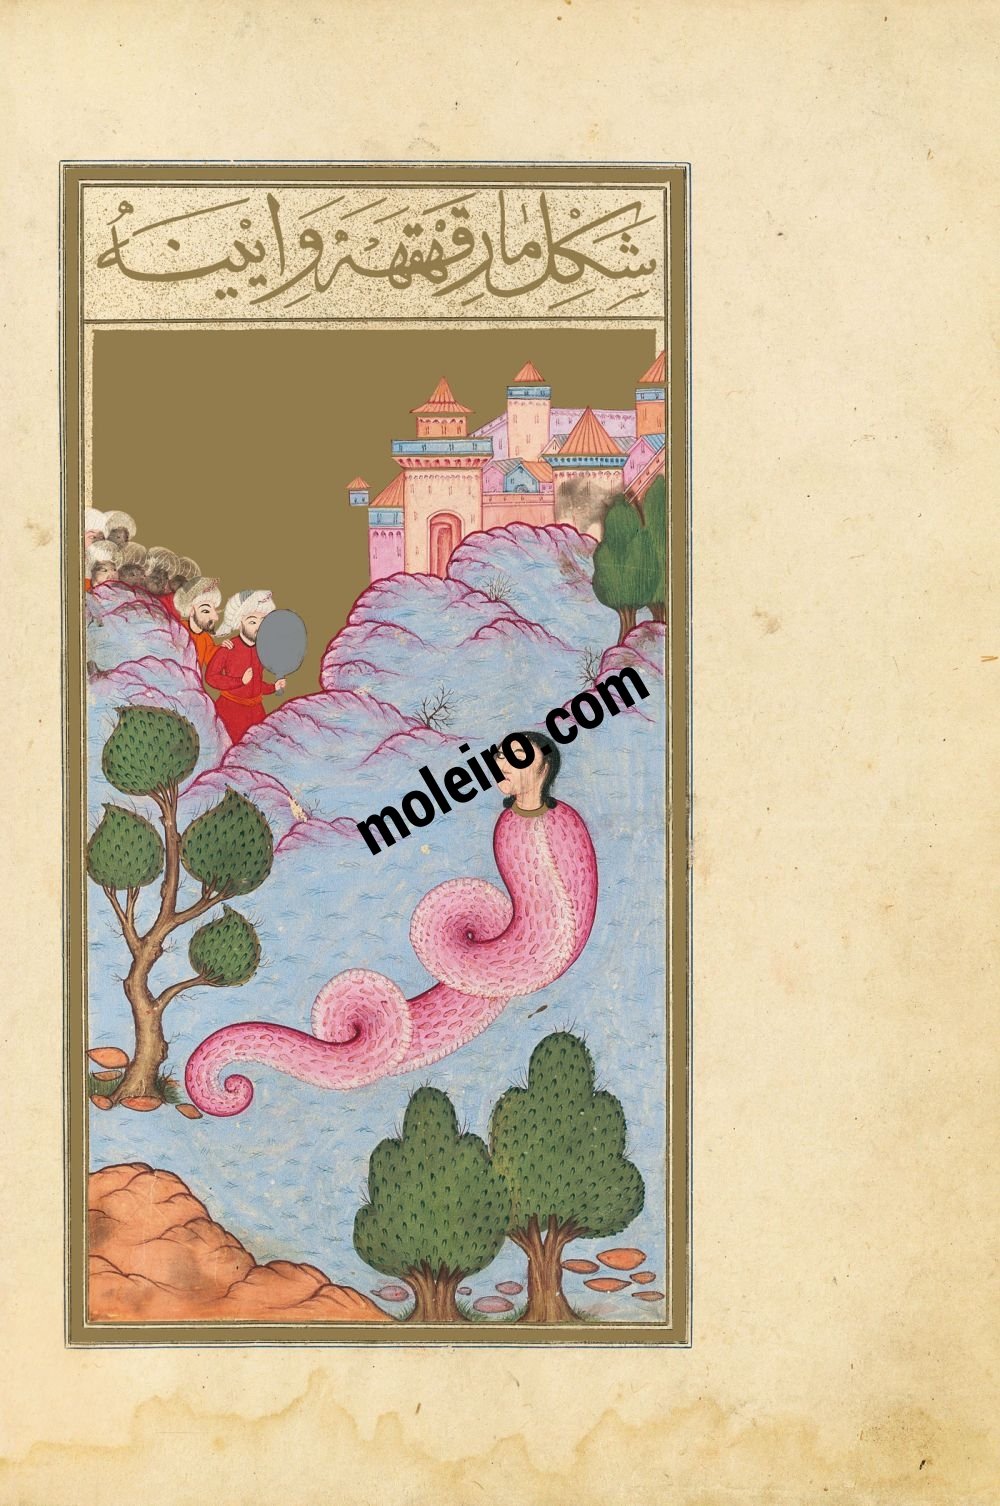 The Book of Felicity f. 90v, The Laughing Snake